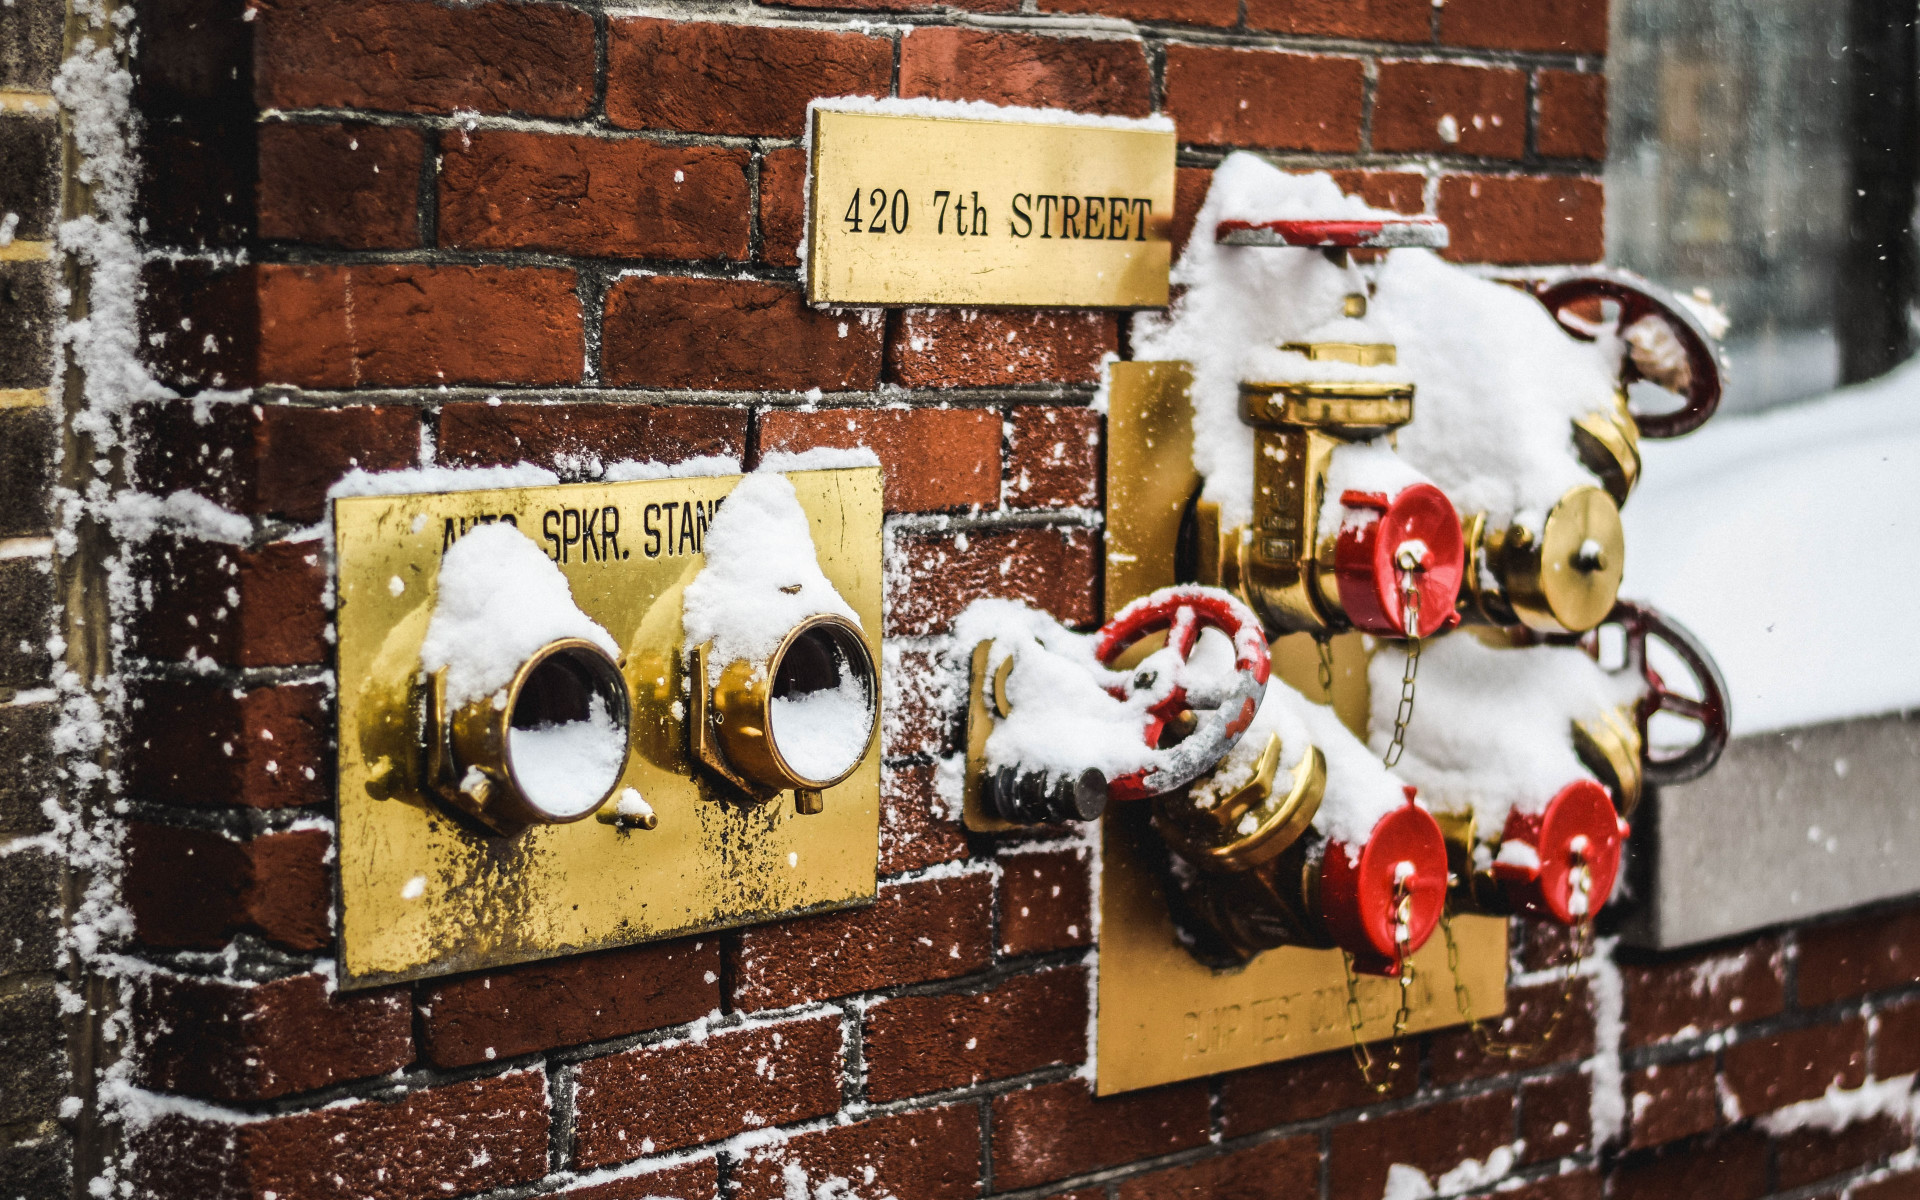 Snow covered fire standpipes in Washington wallpaper 1920x1200